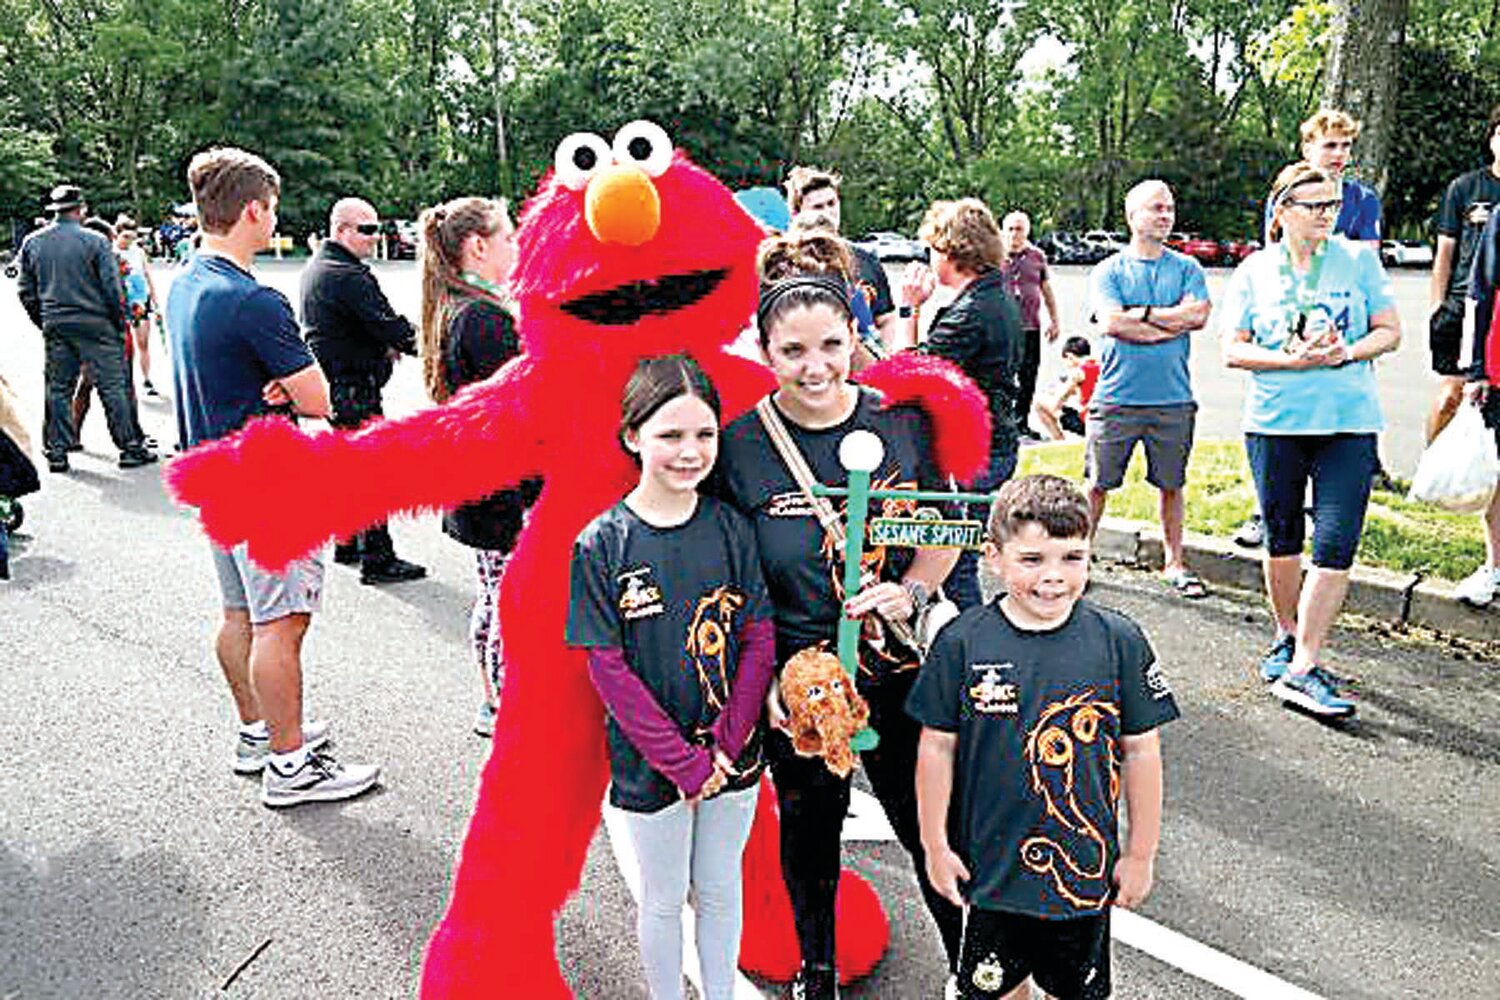 The Herbert Hoover School PTO (Langhorne) receives the annual Spirit Trophy for having the largest runner contingent at Sunday’s Kiwanis-Herald Sesame Place Classic. Celebrating with Sesame character Elmo are Megan Tondi and youngsters Violet and Vincent Tondi.